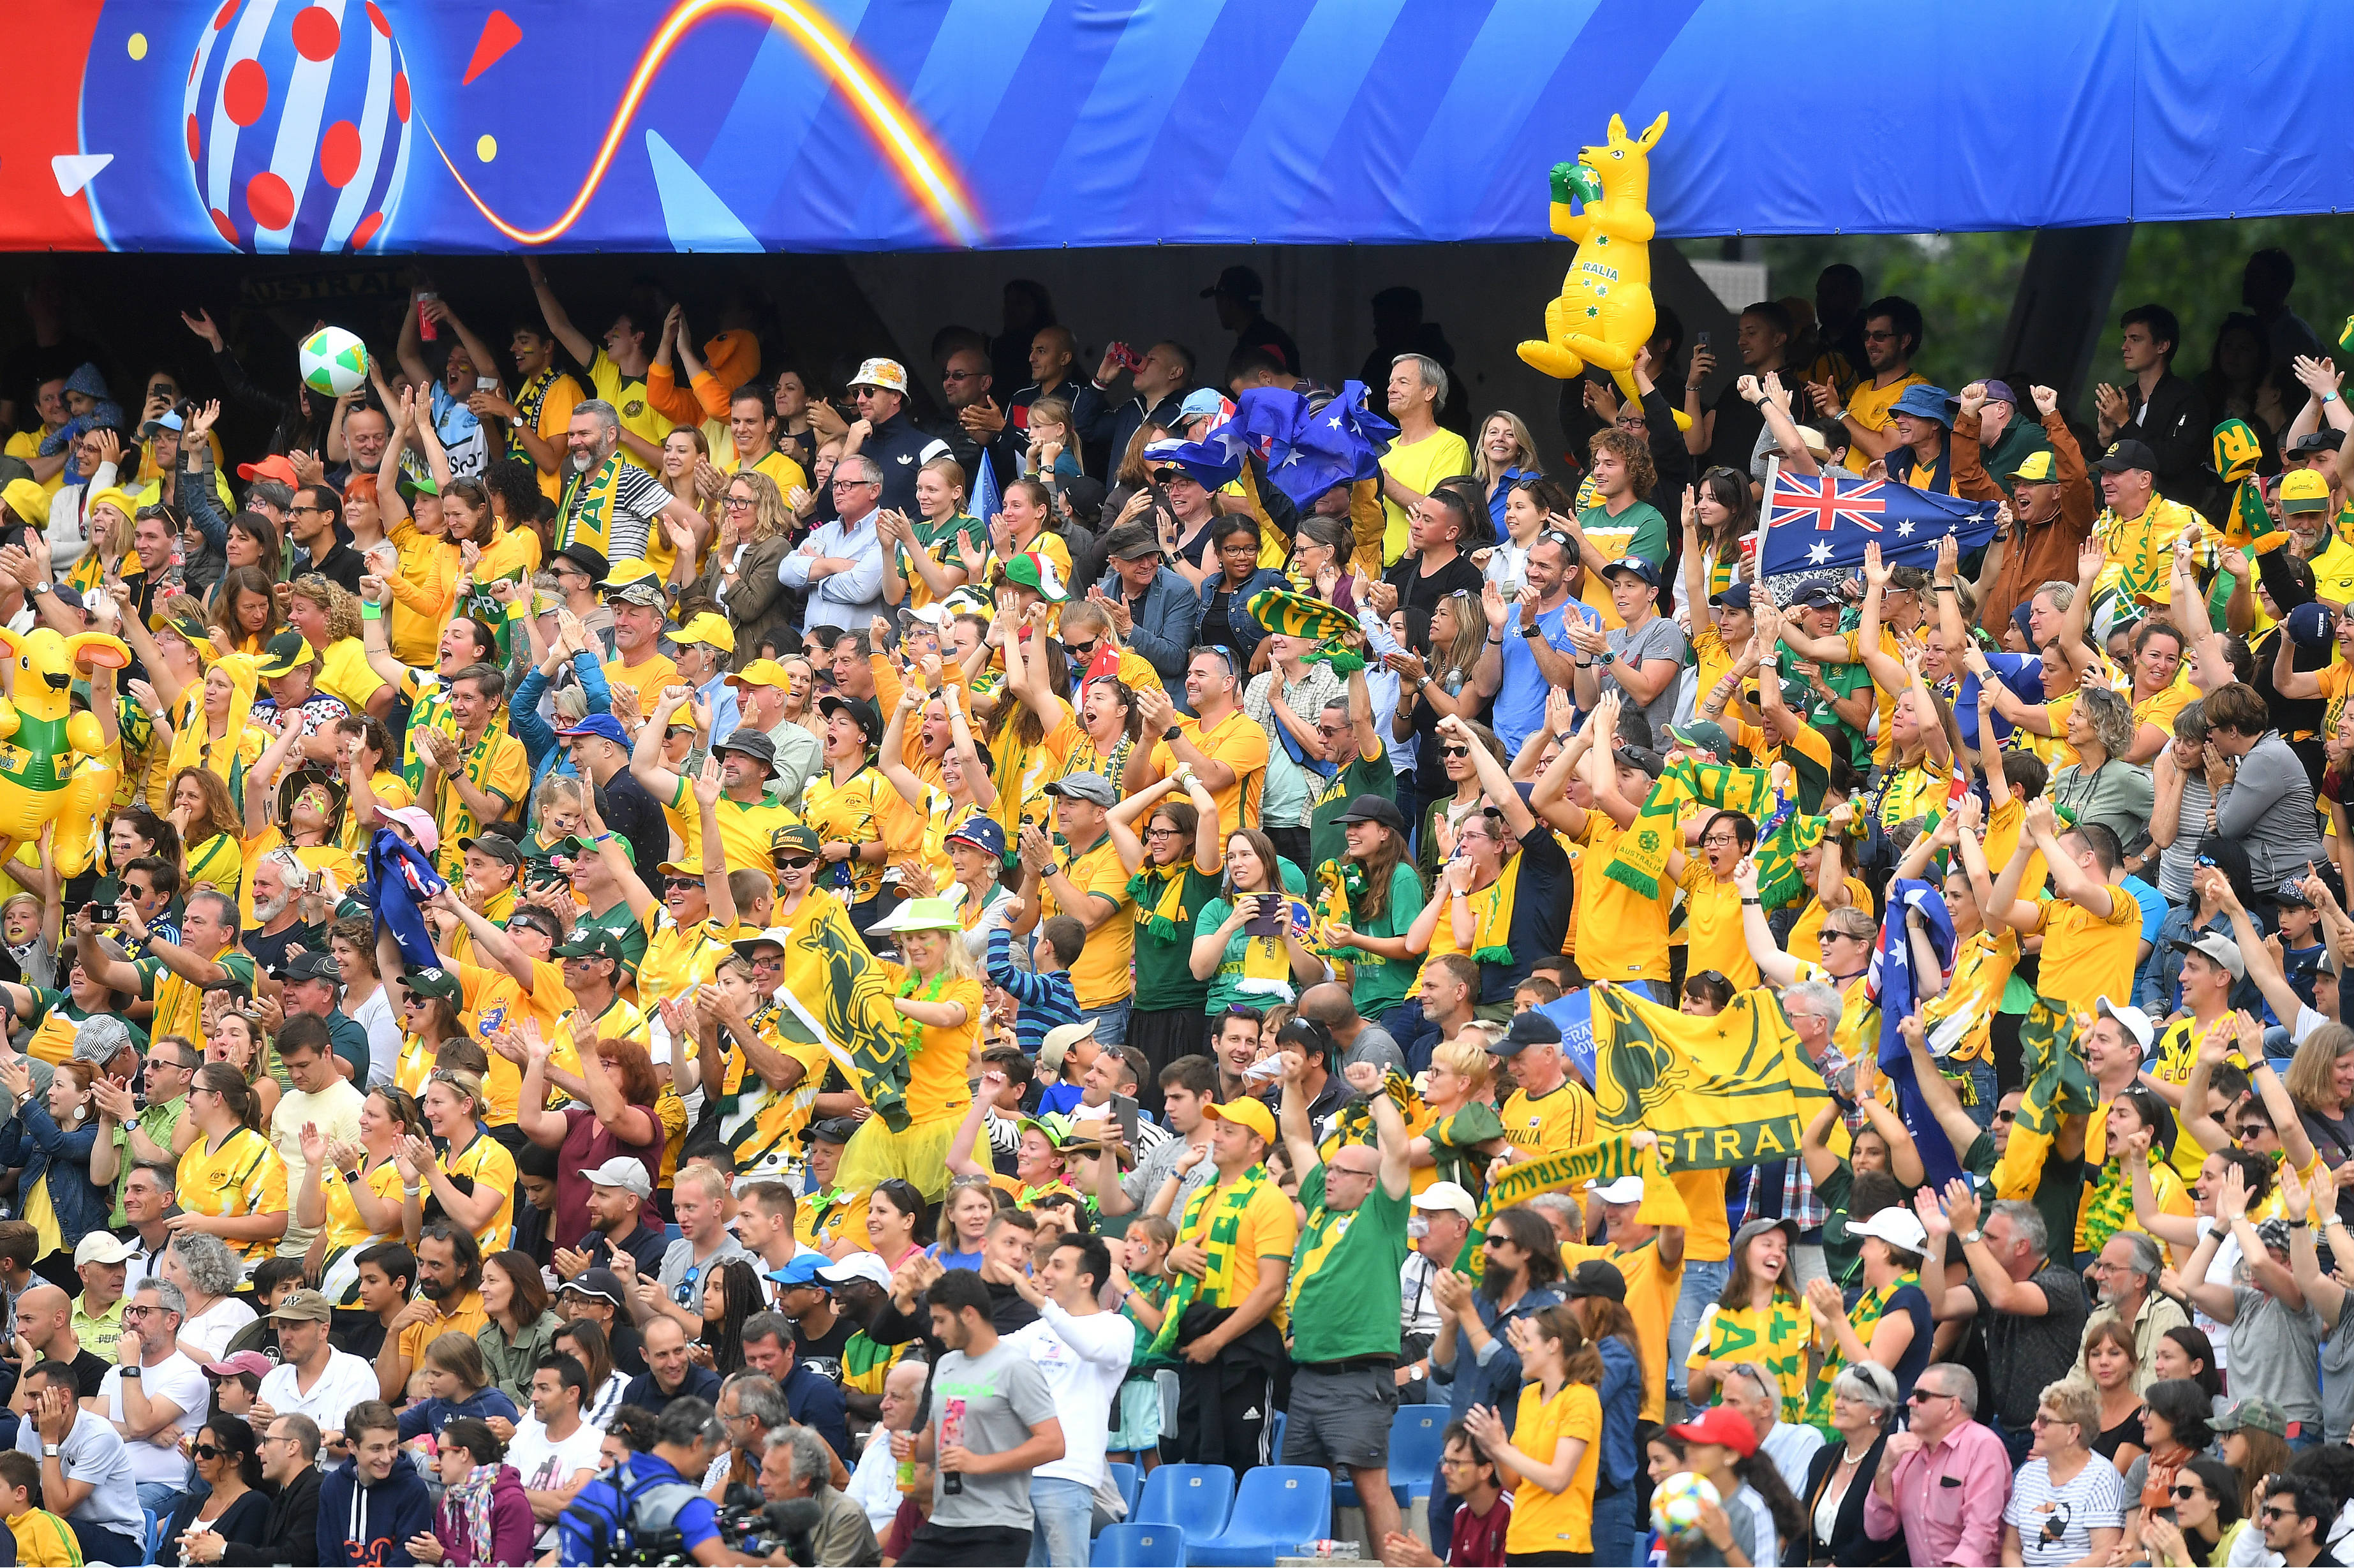 There was plenty of jubilation in the stands from Matildas fans as well